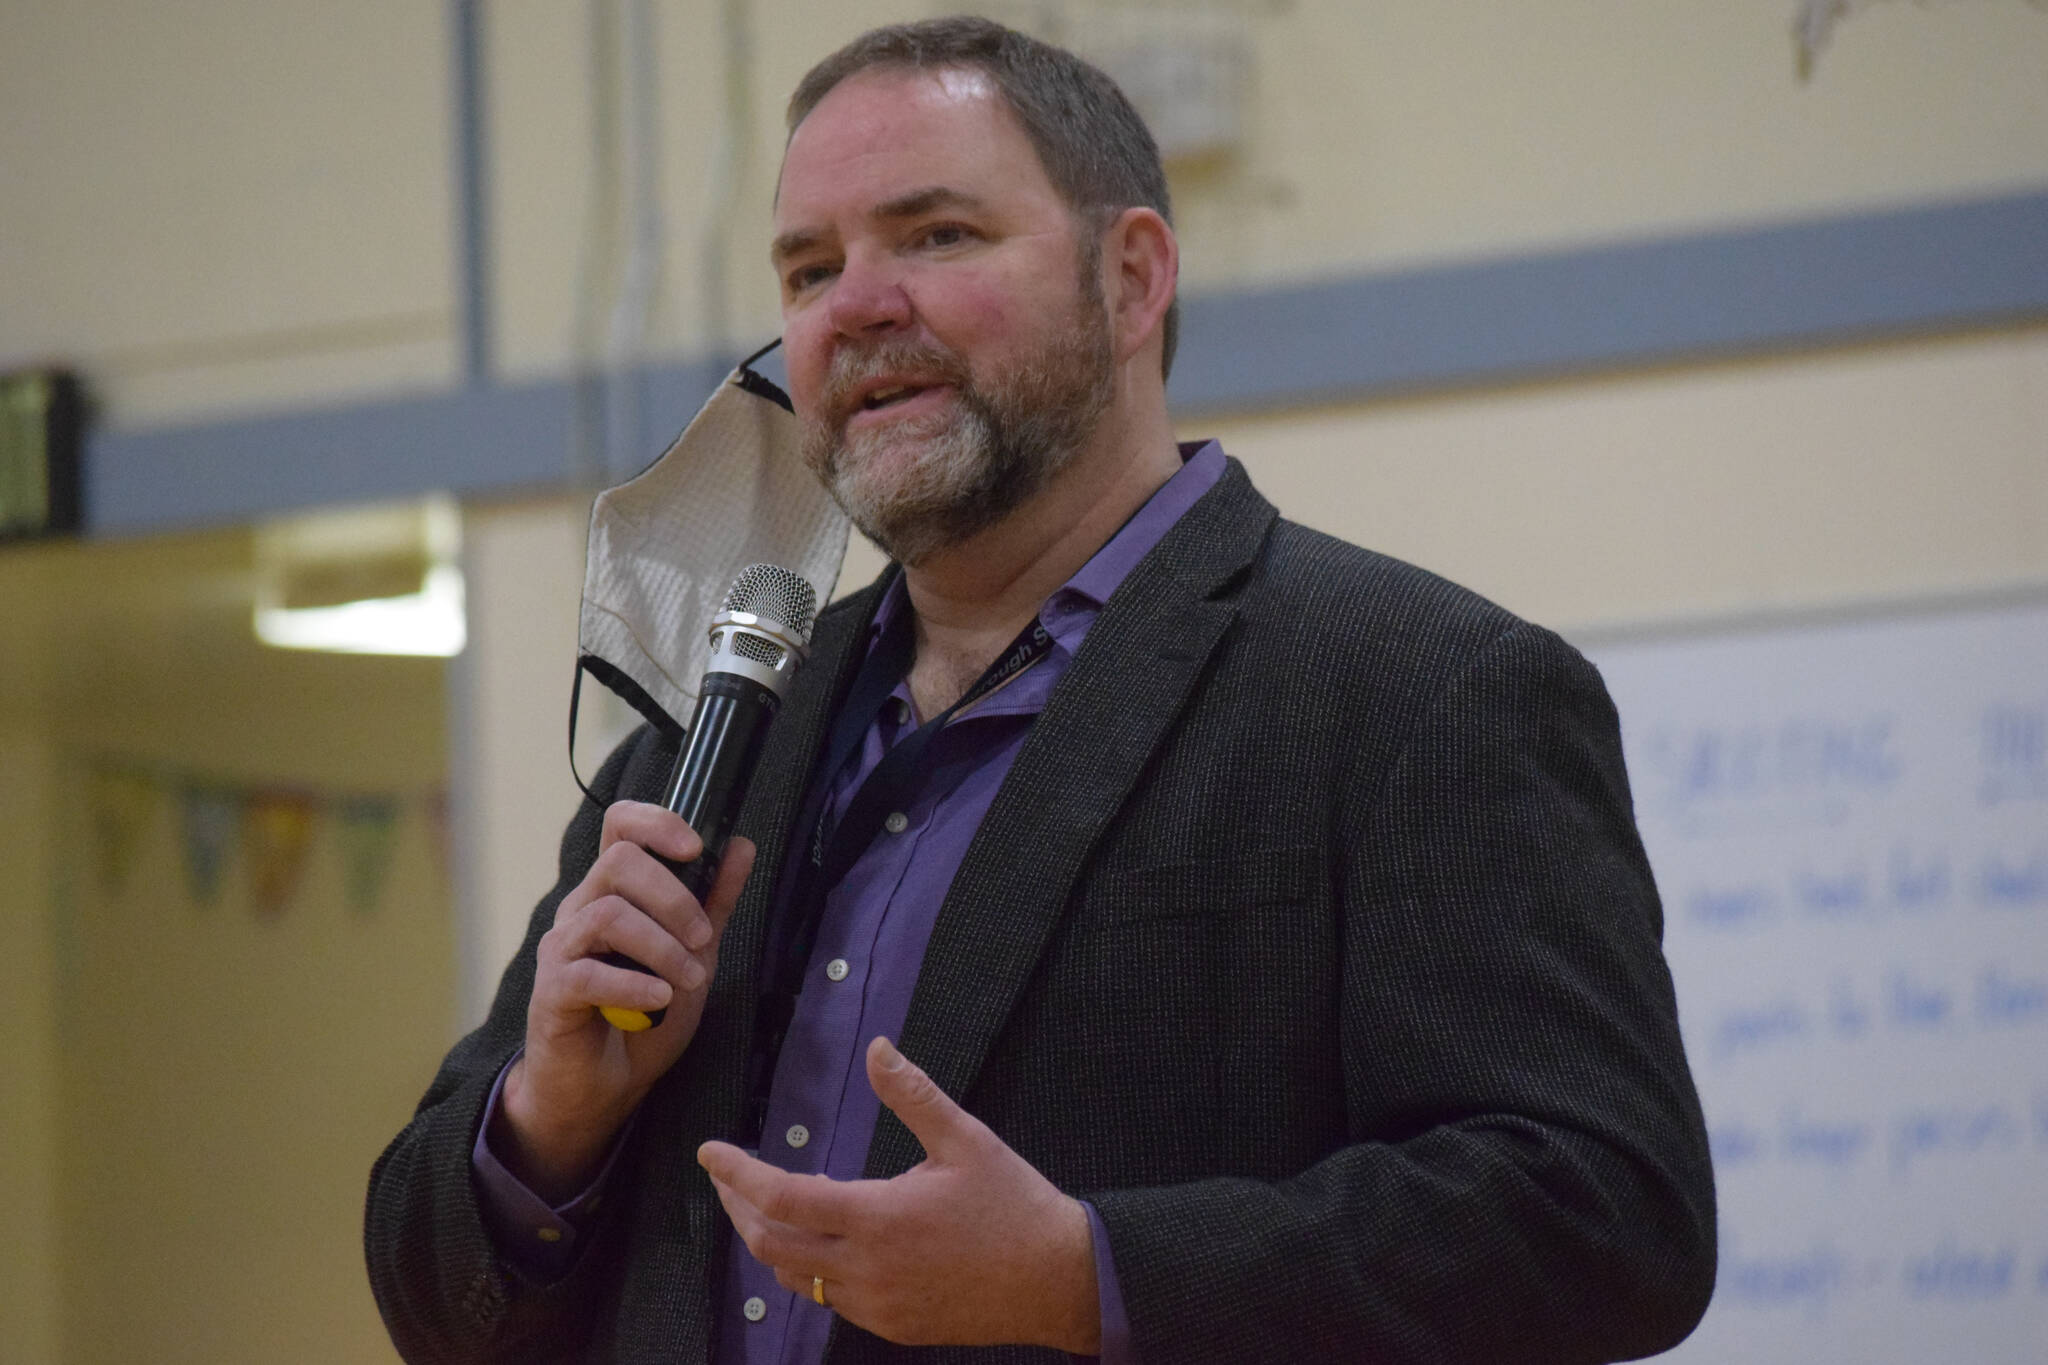 Superintendent Clayton Holland speaks about the National Blue Ribbon award during an assembly at Soldotna Montessori Charter School on Friday, Jan 14, 2022. (Camille Botello / Peninsula Clarion)